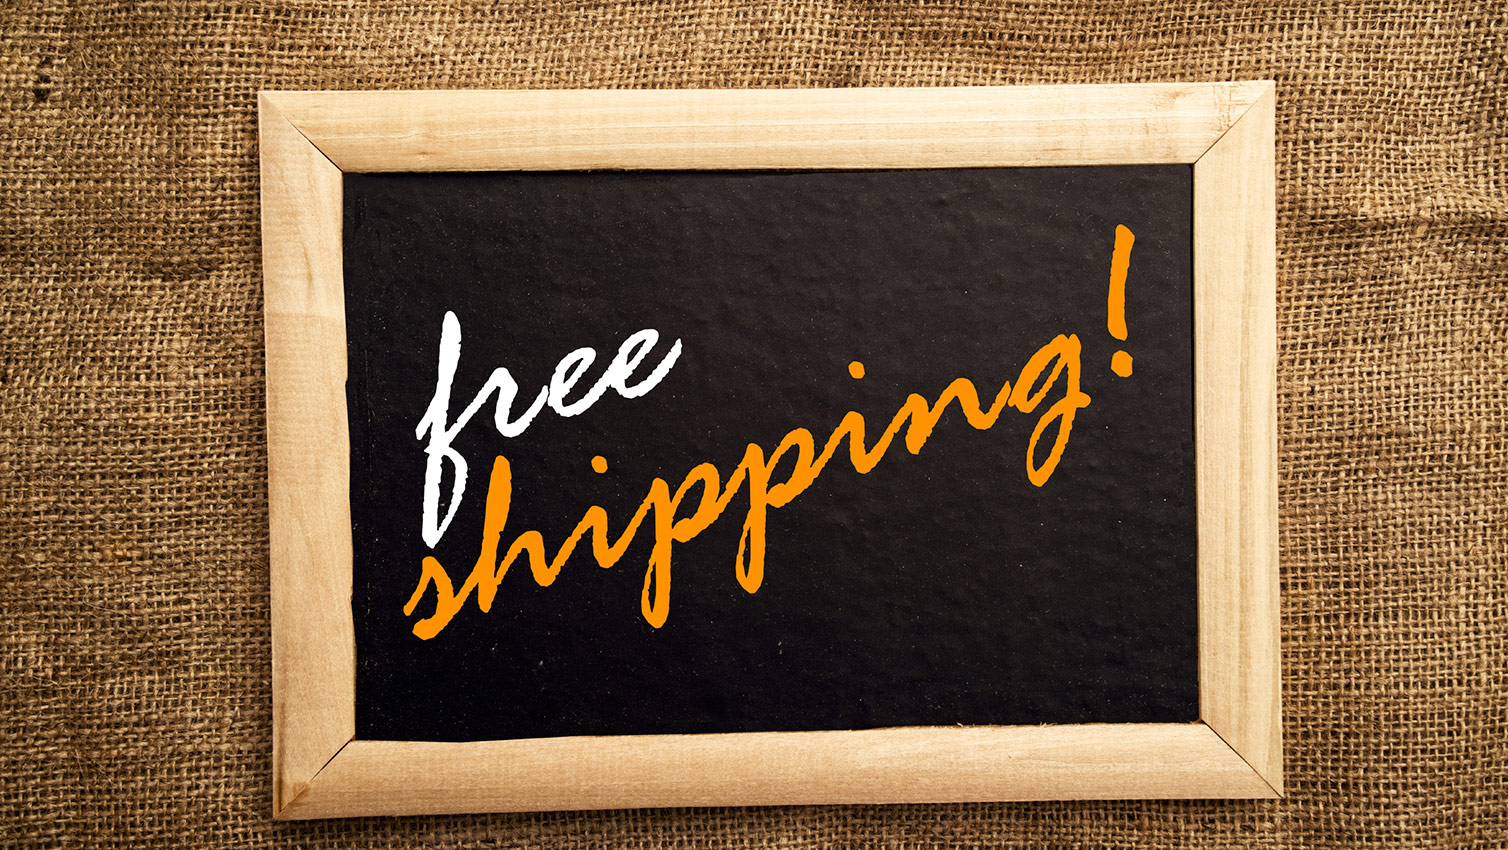 Email Marketing Insights from Free Shipping Day